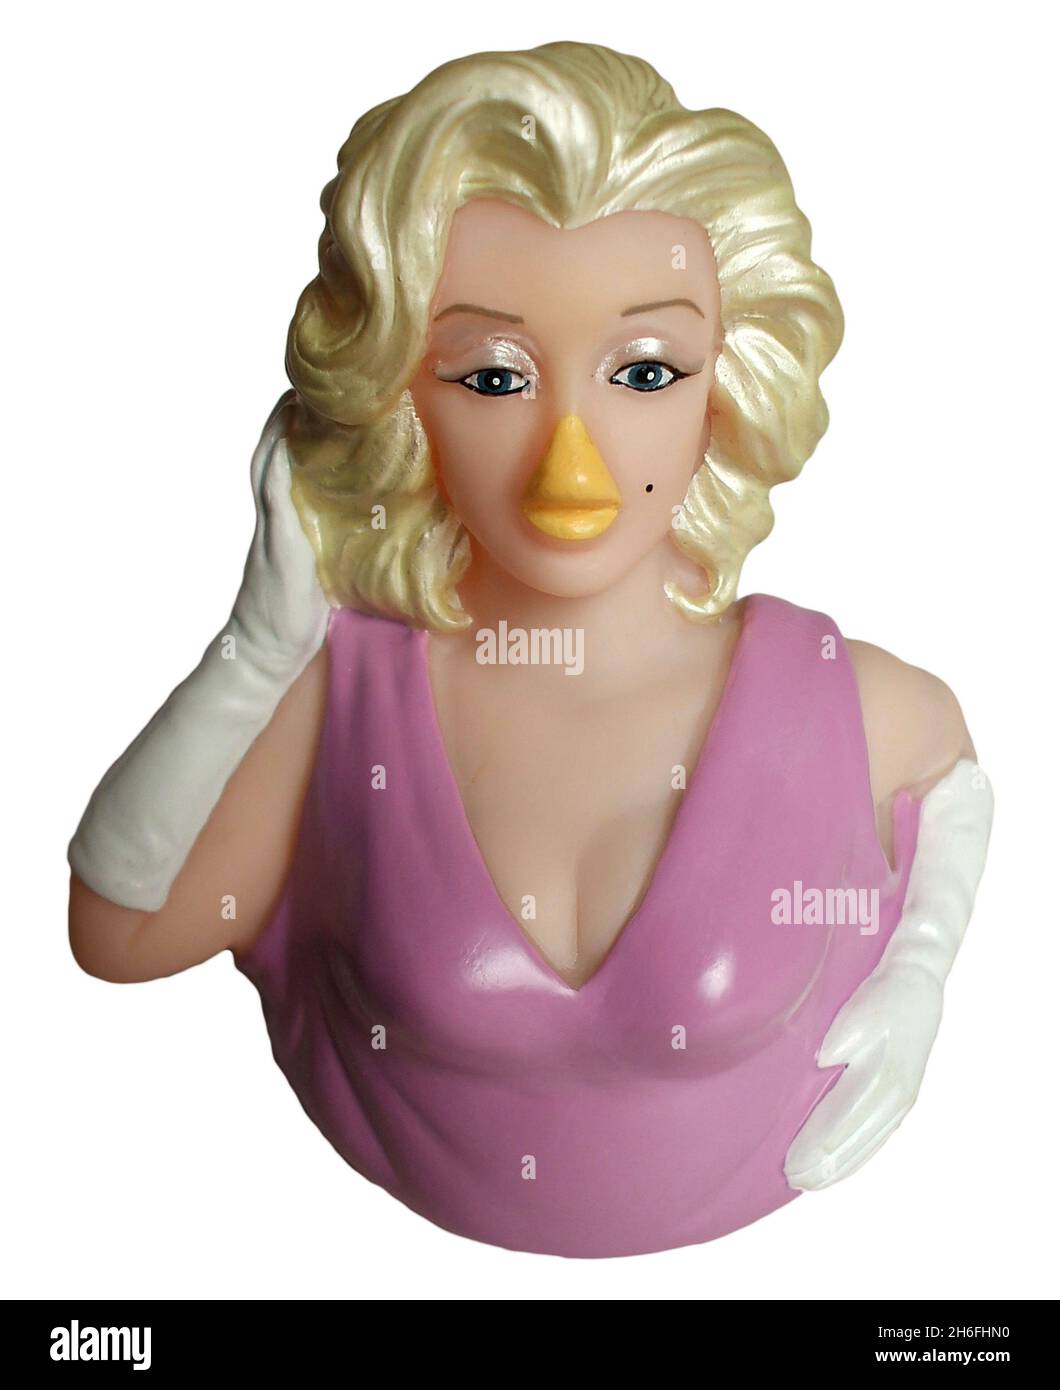 Wash With The Stars - Founded by American Craig Wolfe, Celebriducks manufactures limited edition collectible celebrity rubber ducks of the greatest icons of film, music, history and sport. To date they have created over 200 different CelebriDucks including Marilyn Monroe, Barack Obama, James Dean, Michael Jackson, Shakespeare and even Jesus and The Pope. The A team icon Mr T has proved to be the most popular duck. Limited editions such as Michael Jackson have since sold out and are now retired.  Jeff Moore/ Celebriducks.com Picture shows: Marilyn Monroe Stock Photo